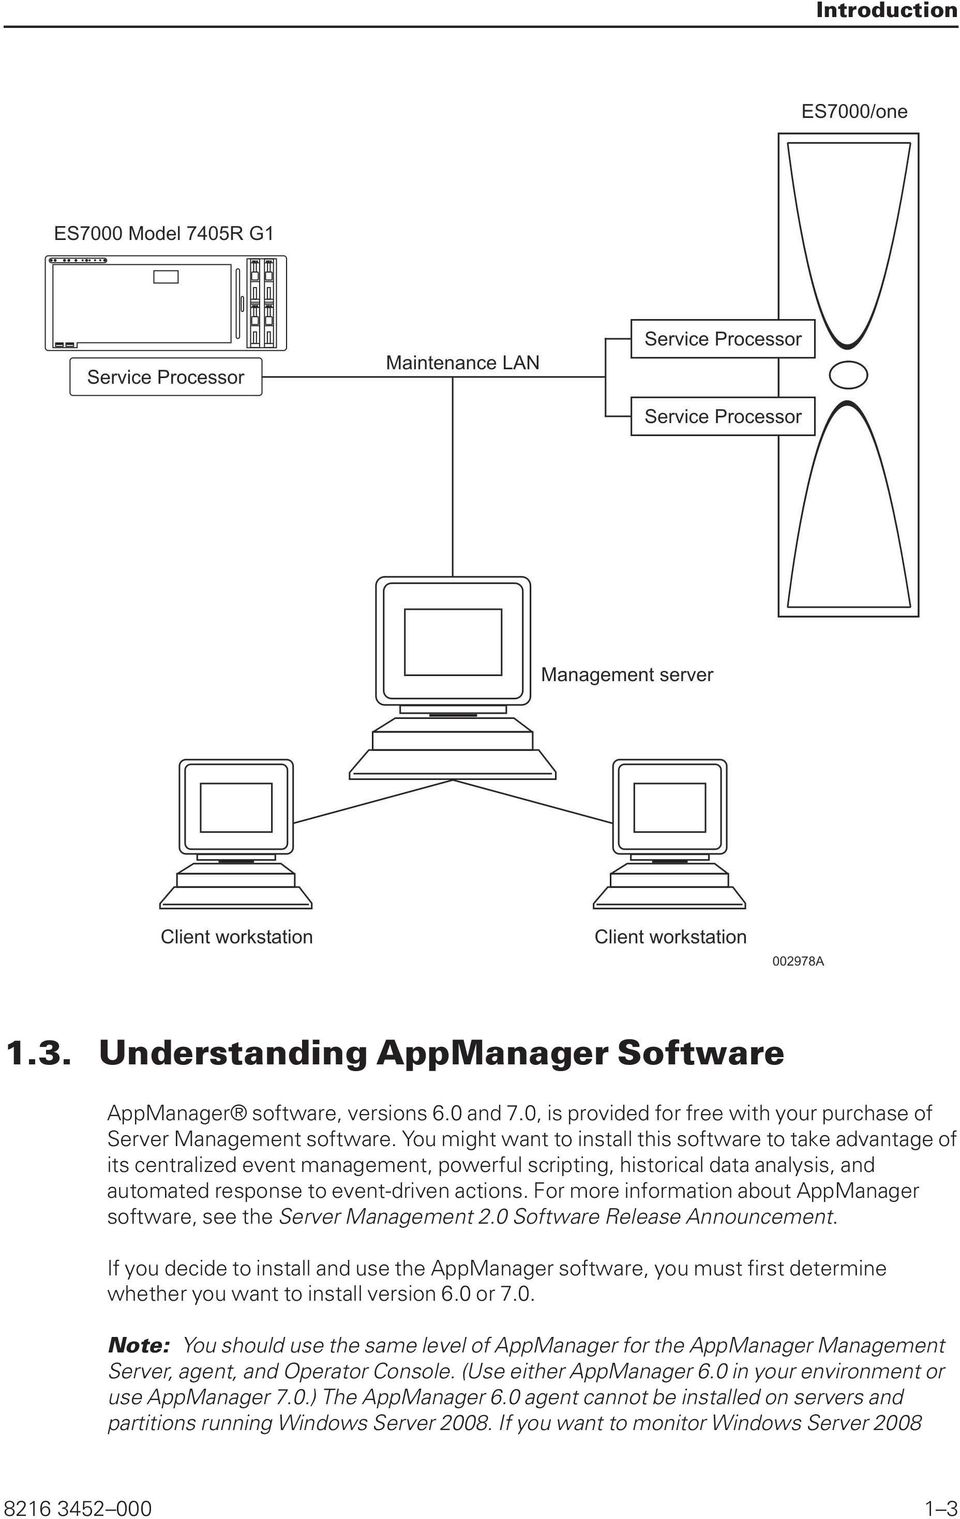 For more information about AppManager software, see the Server Management 2.0 Software Release Announcement.